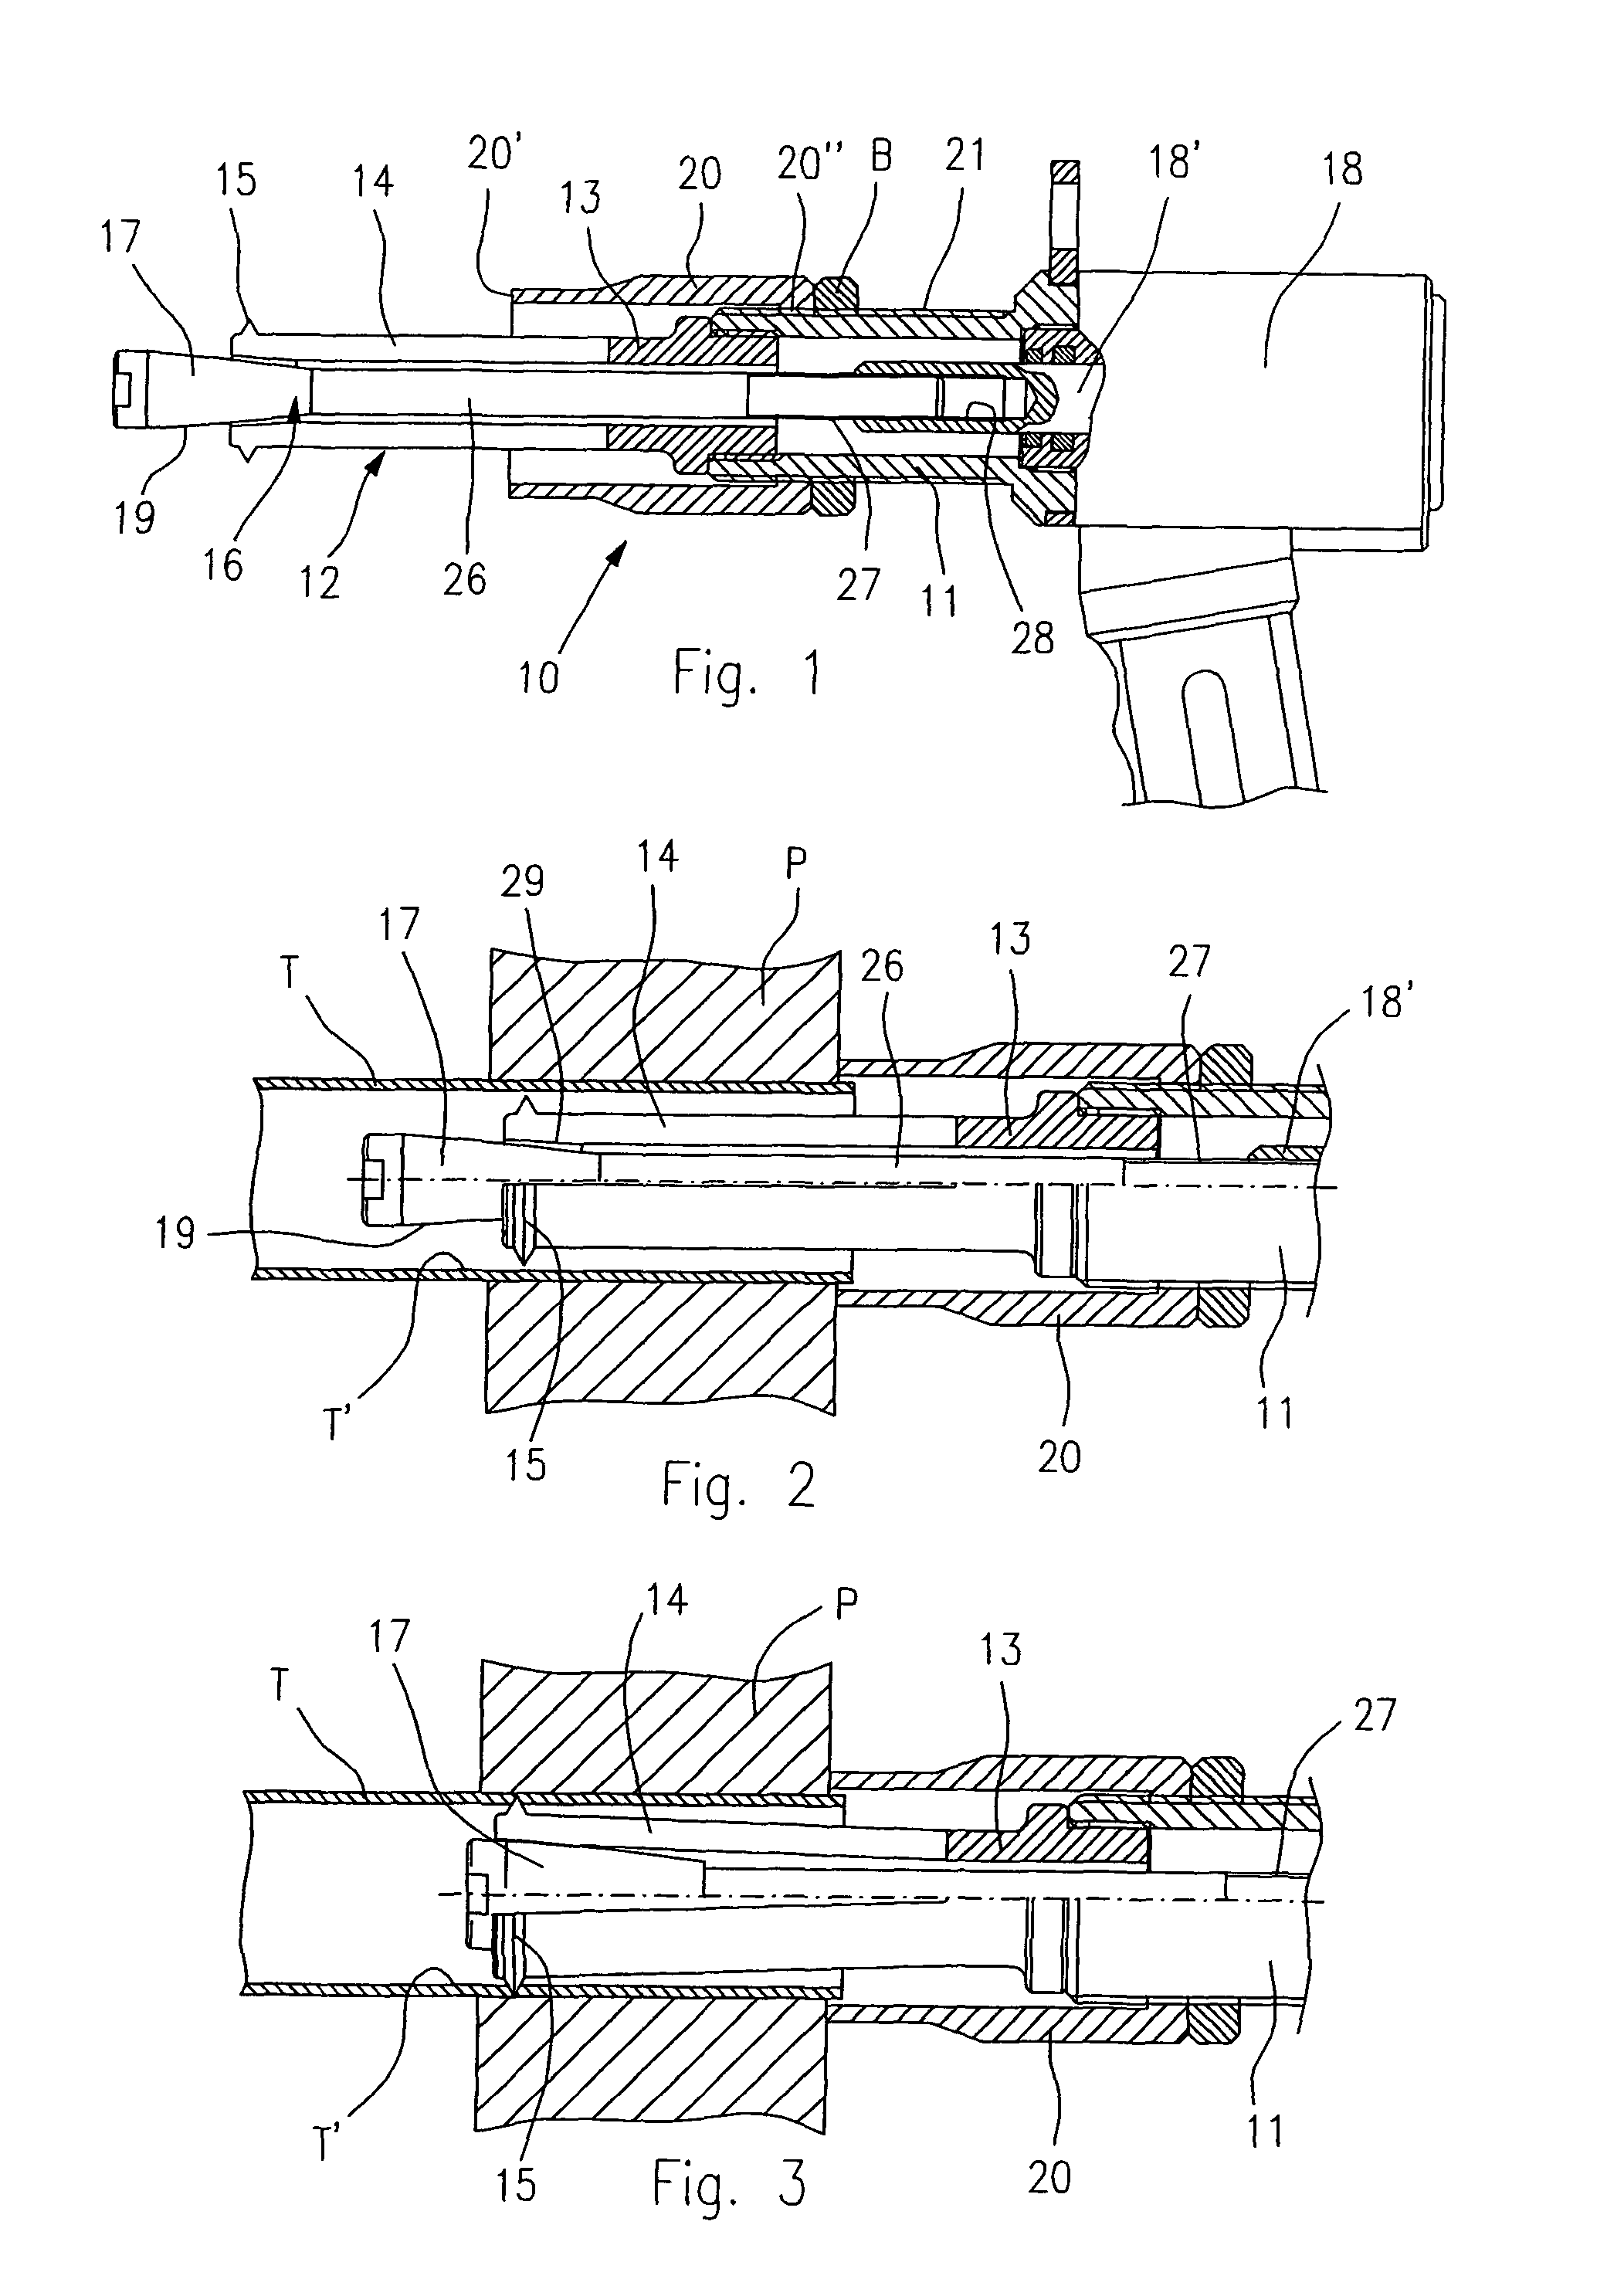 Multipurpose expansion work device for the cutting or expansion of metal tubes